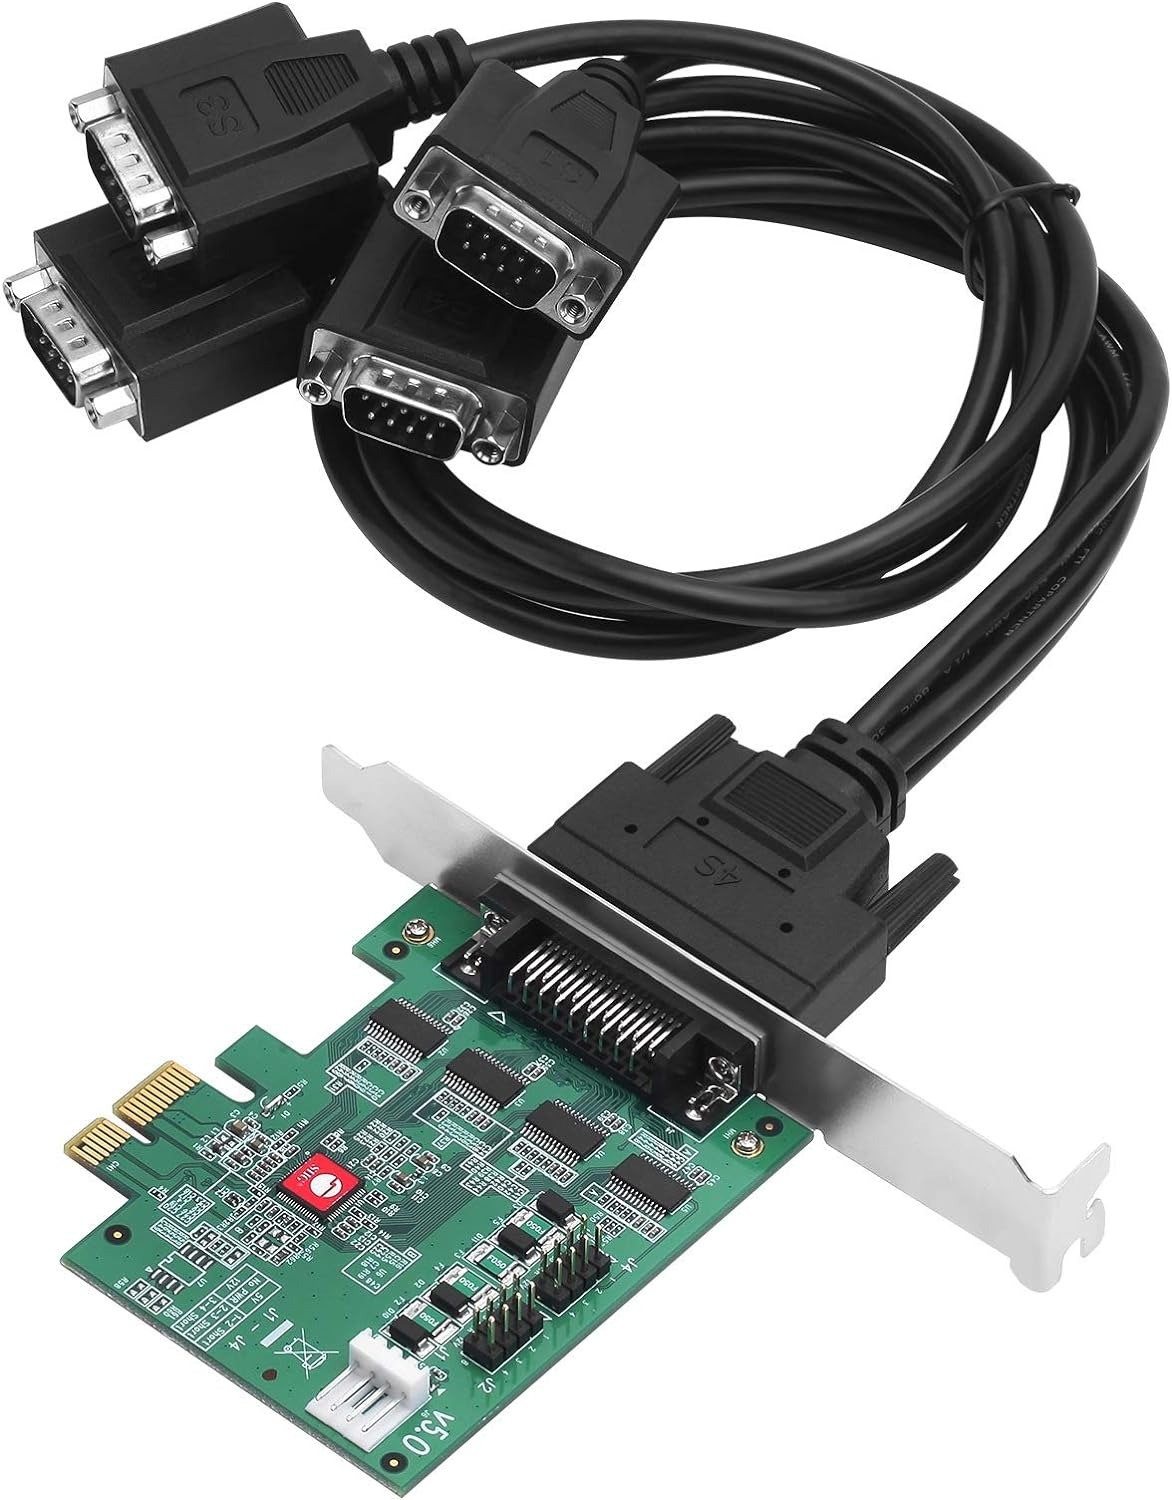 DP Cyberserial 4S Pcie, 16550 UART, Baud Rates up to 921Kbps, Pcie 2.0 X1 to 4X 